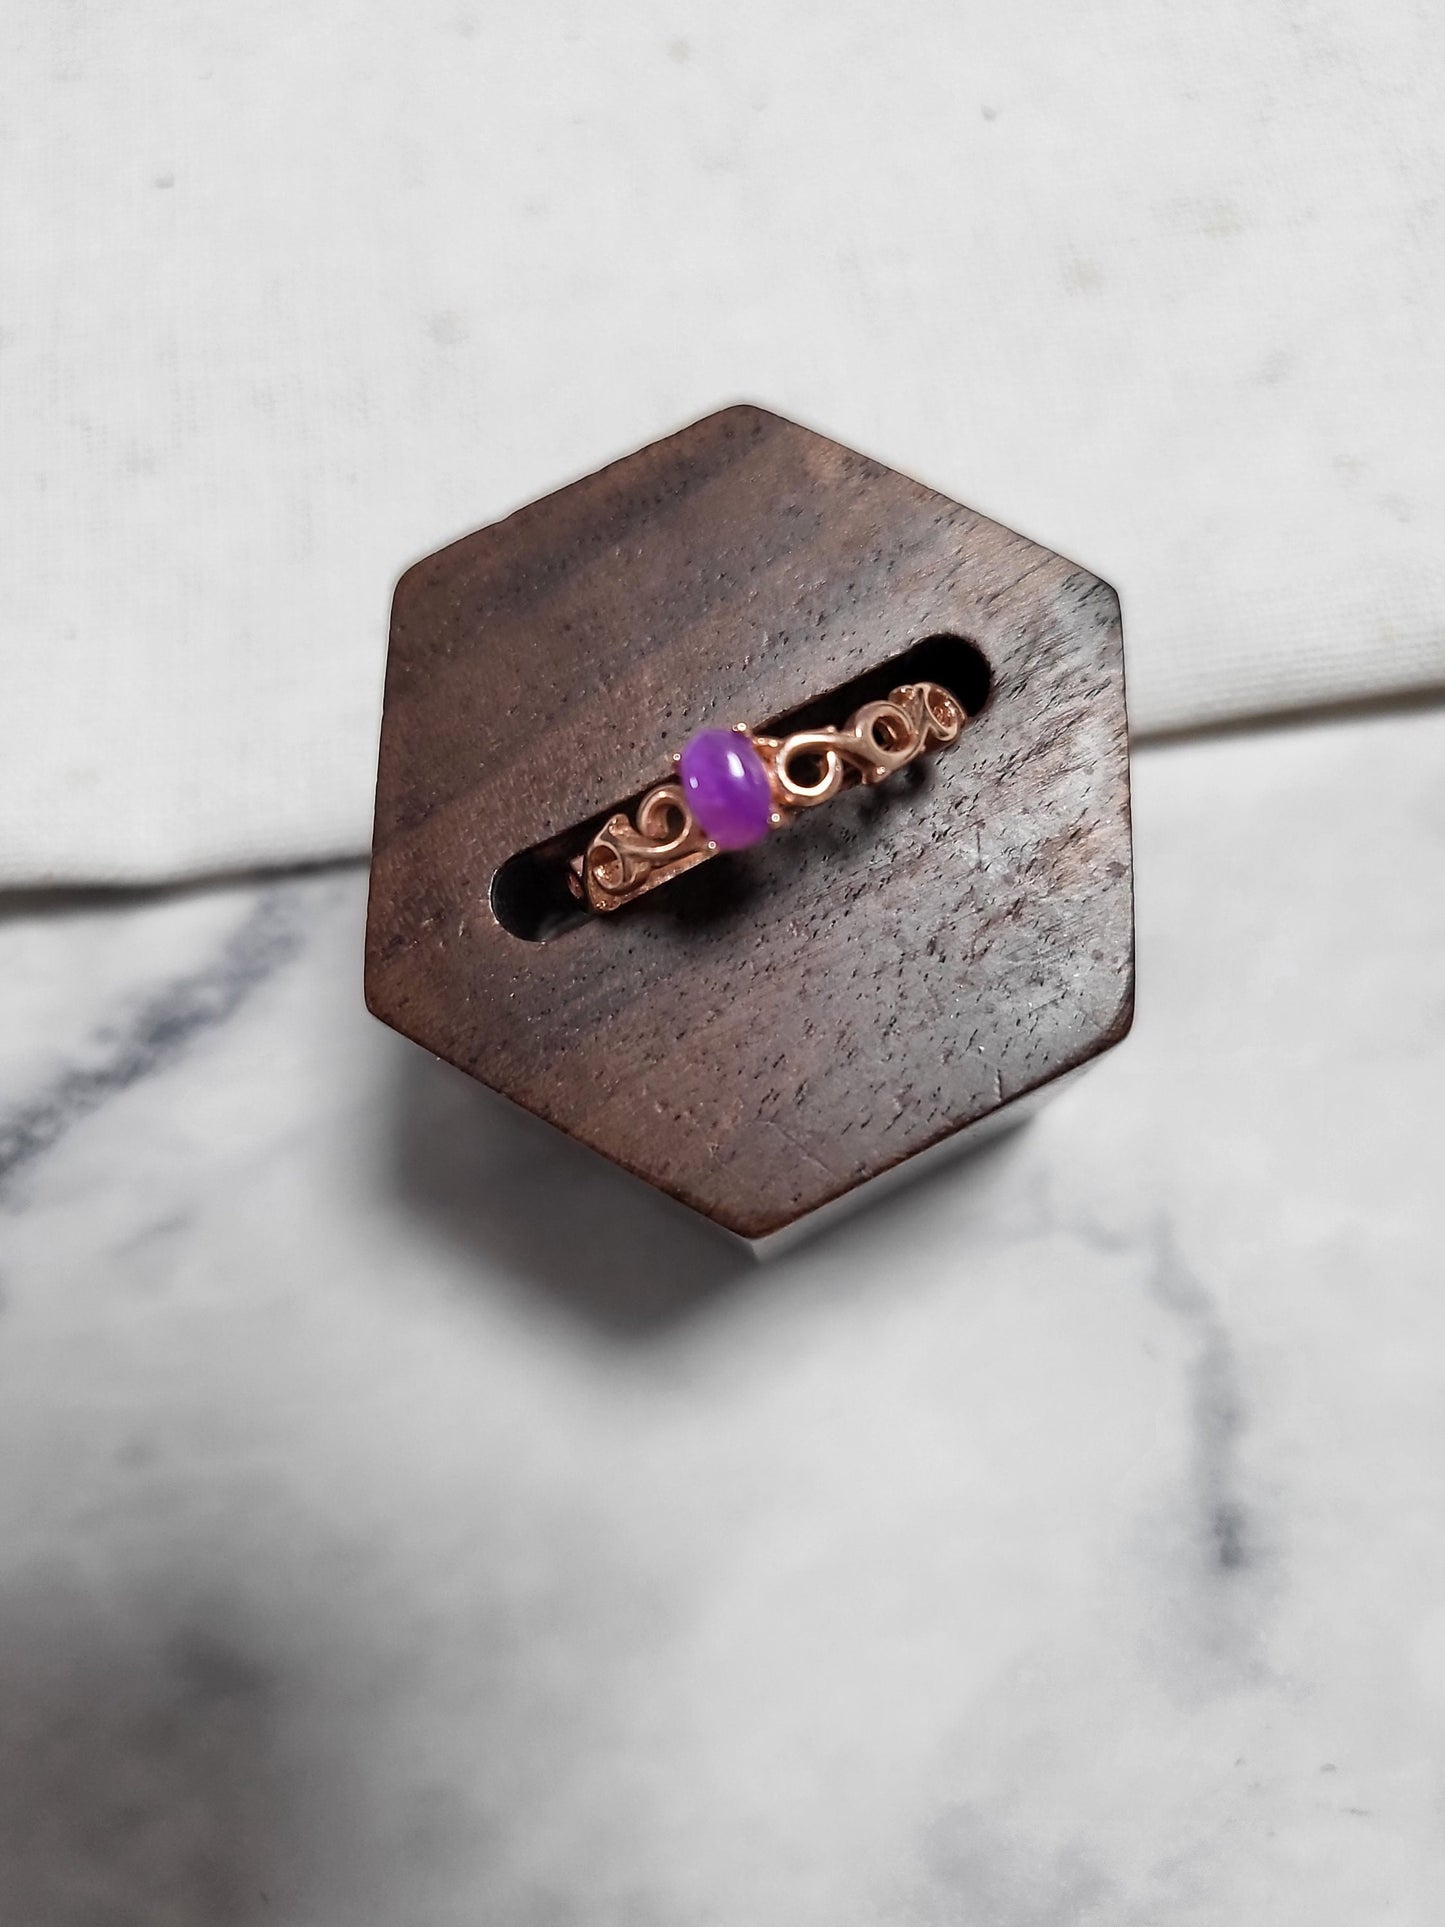 RARE Natural Sugilite Ring Purple Gemstone Dainty Adjustable Rose Gold Ring with Crystals